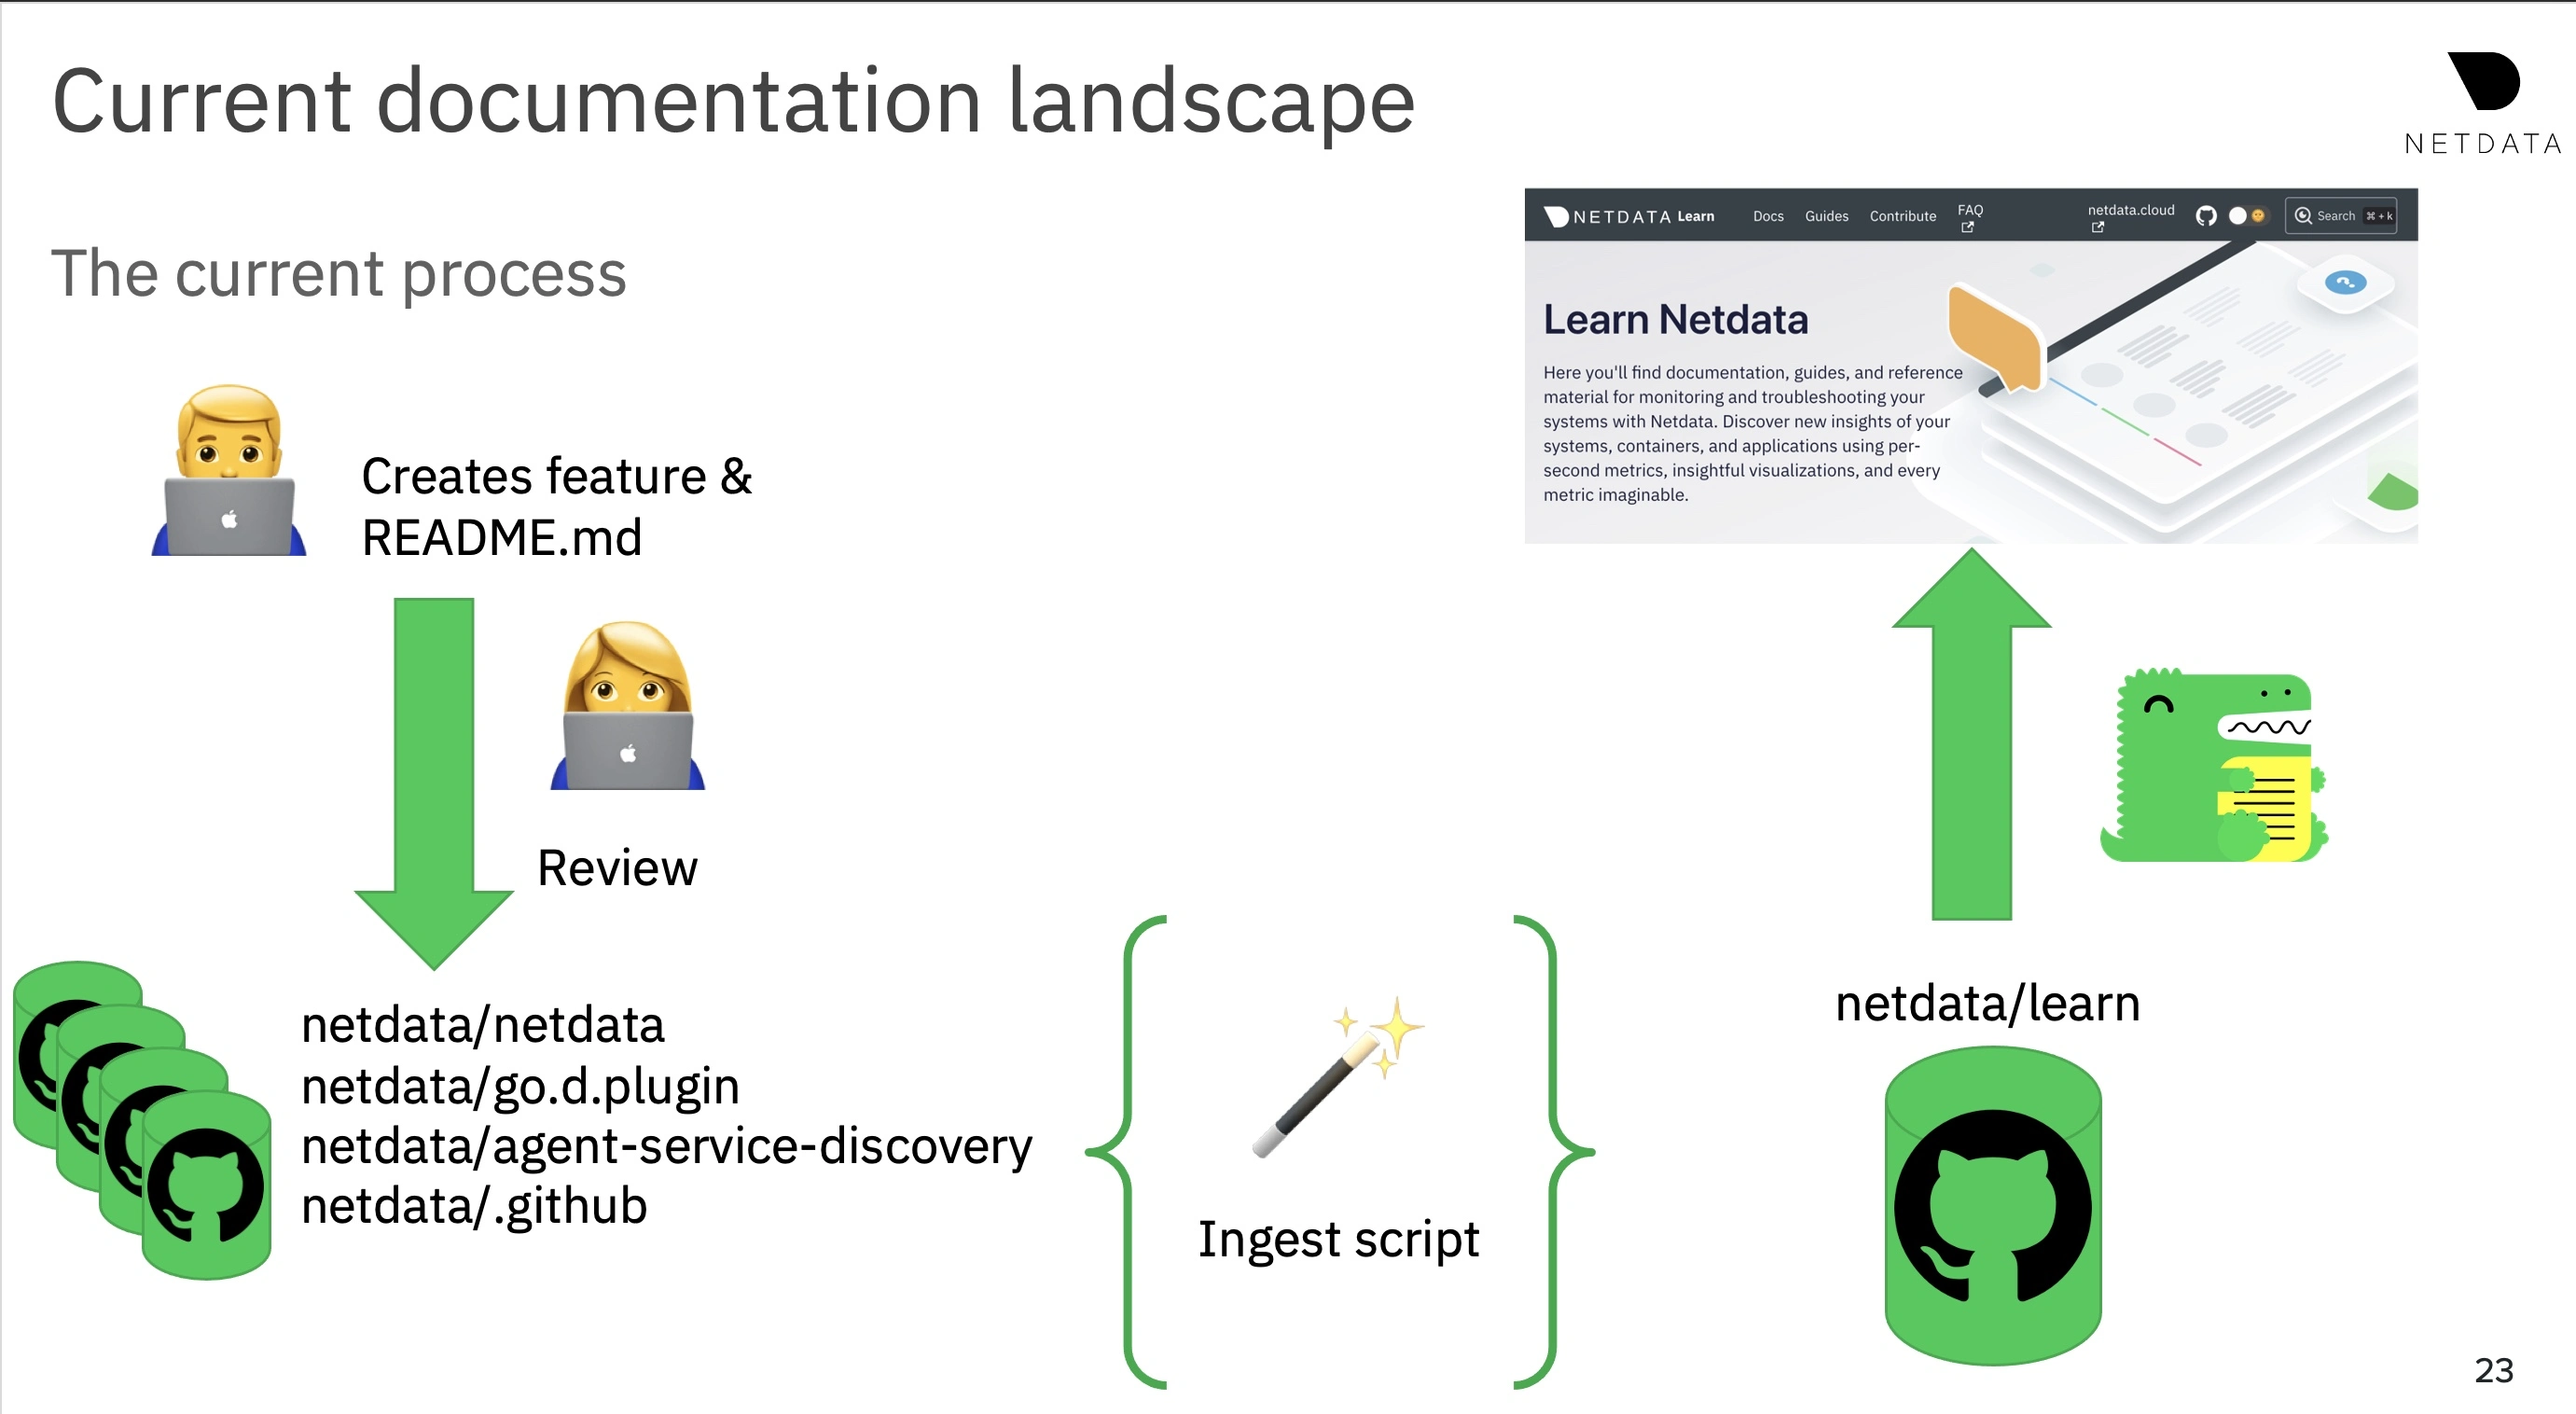 The picture shows how the documentation was set up at Netdata.